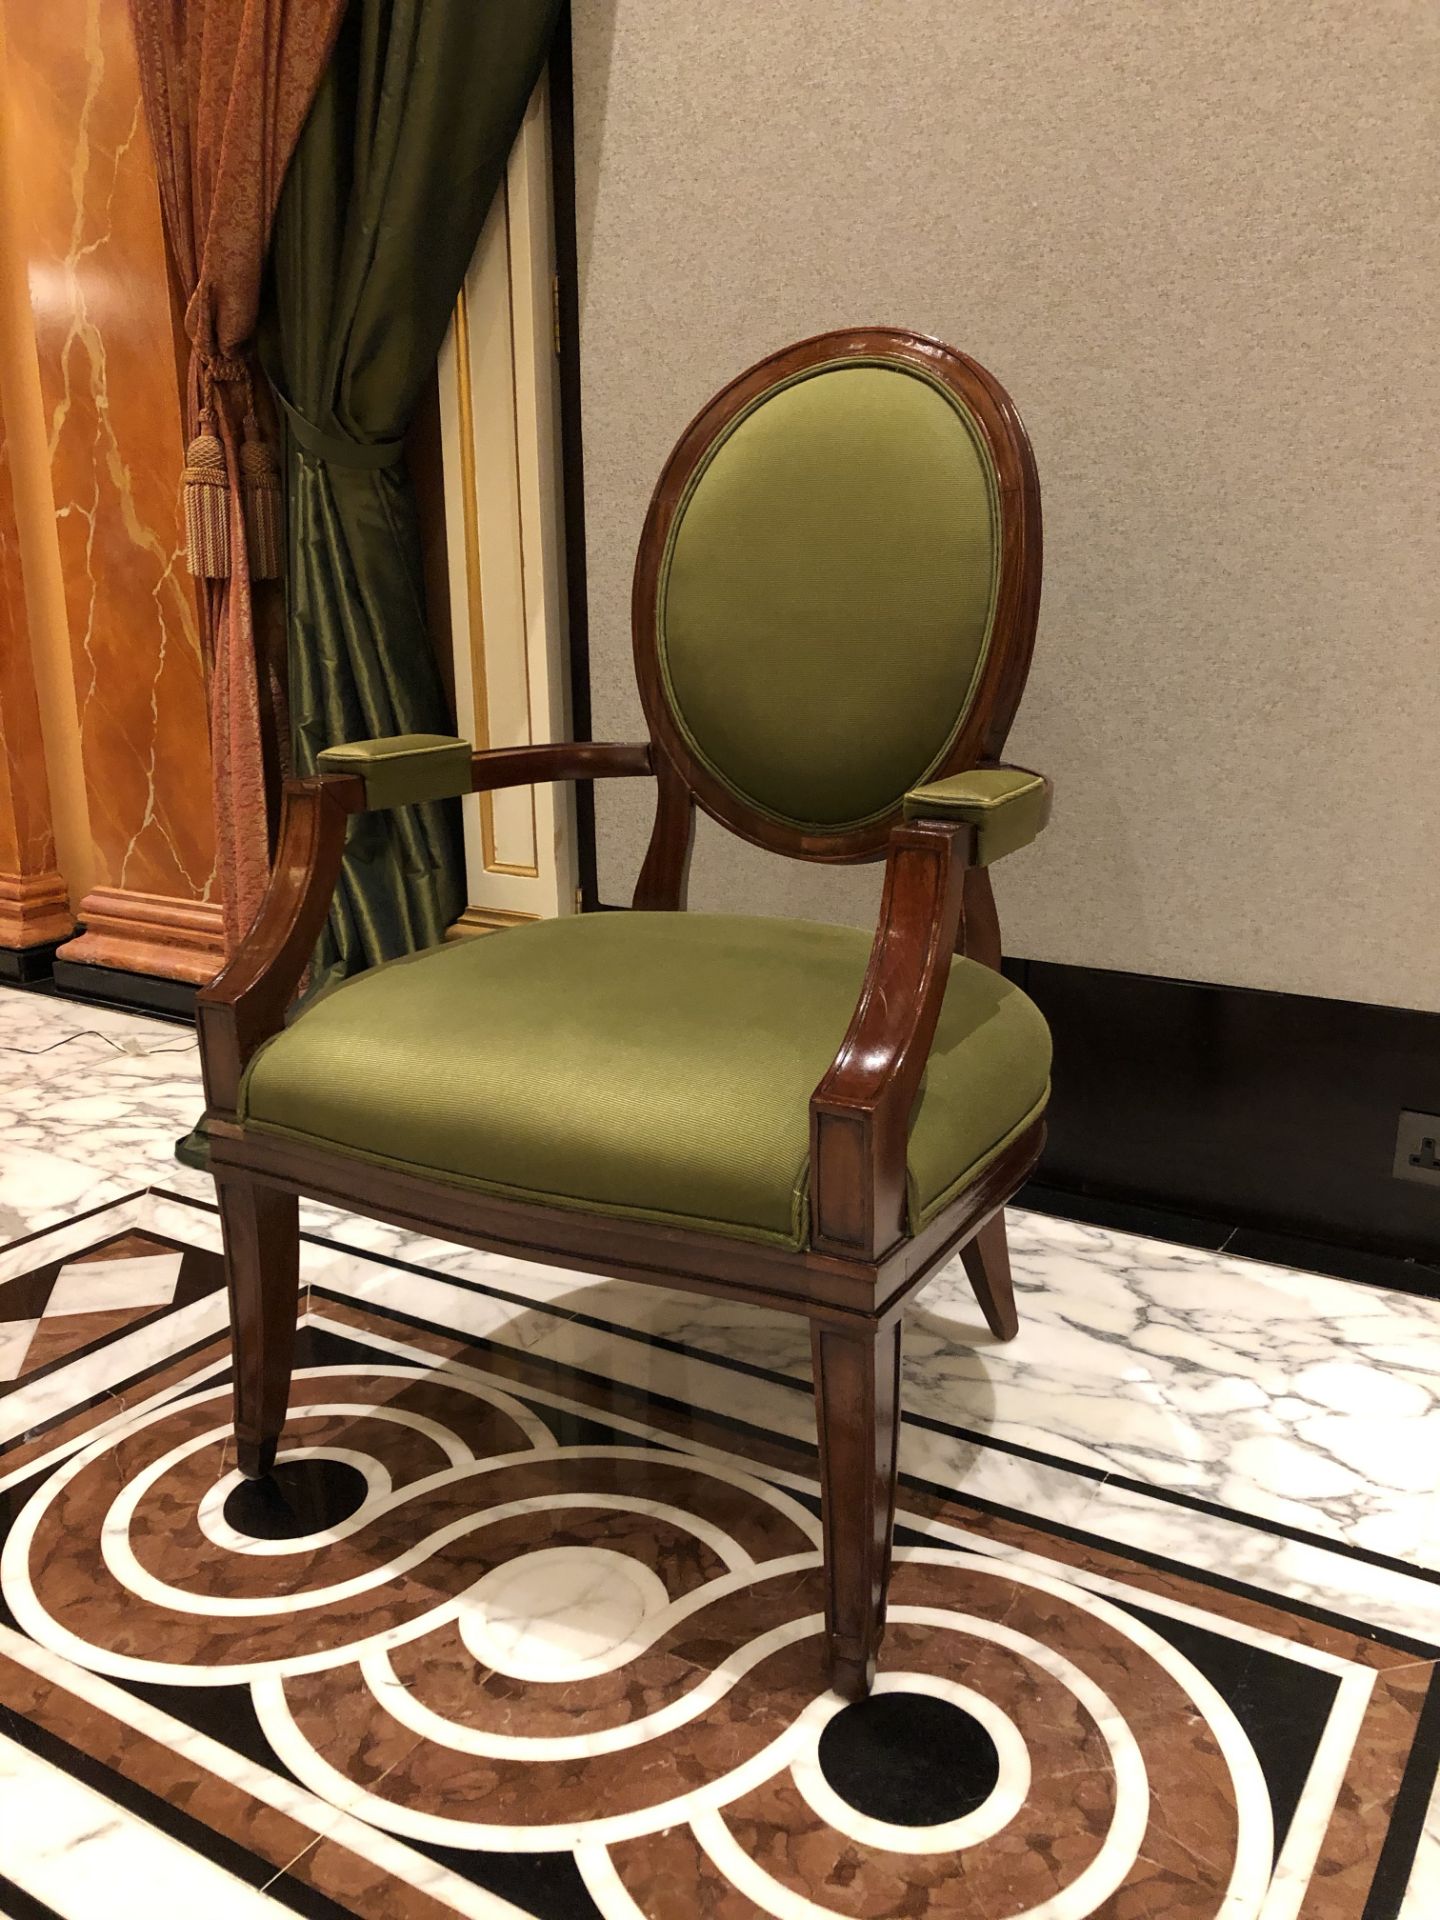 Louis XVI Style Framed And Upholstered Arm Chair In Lelievre Paris Olive Green Salon Chair 68 x 68 x